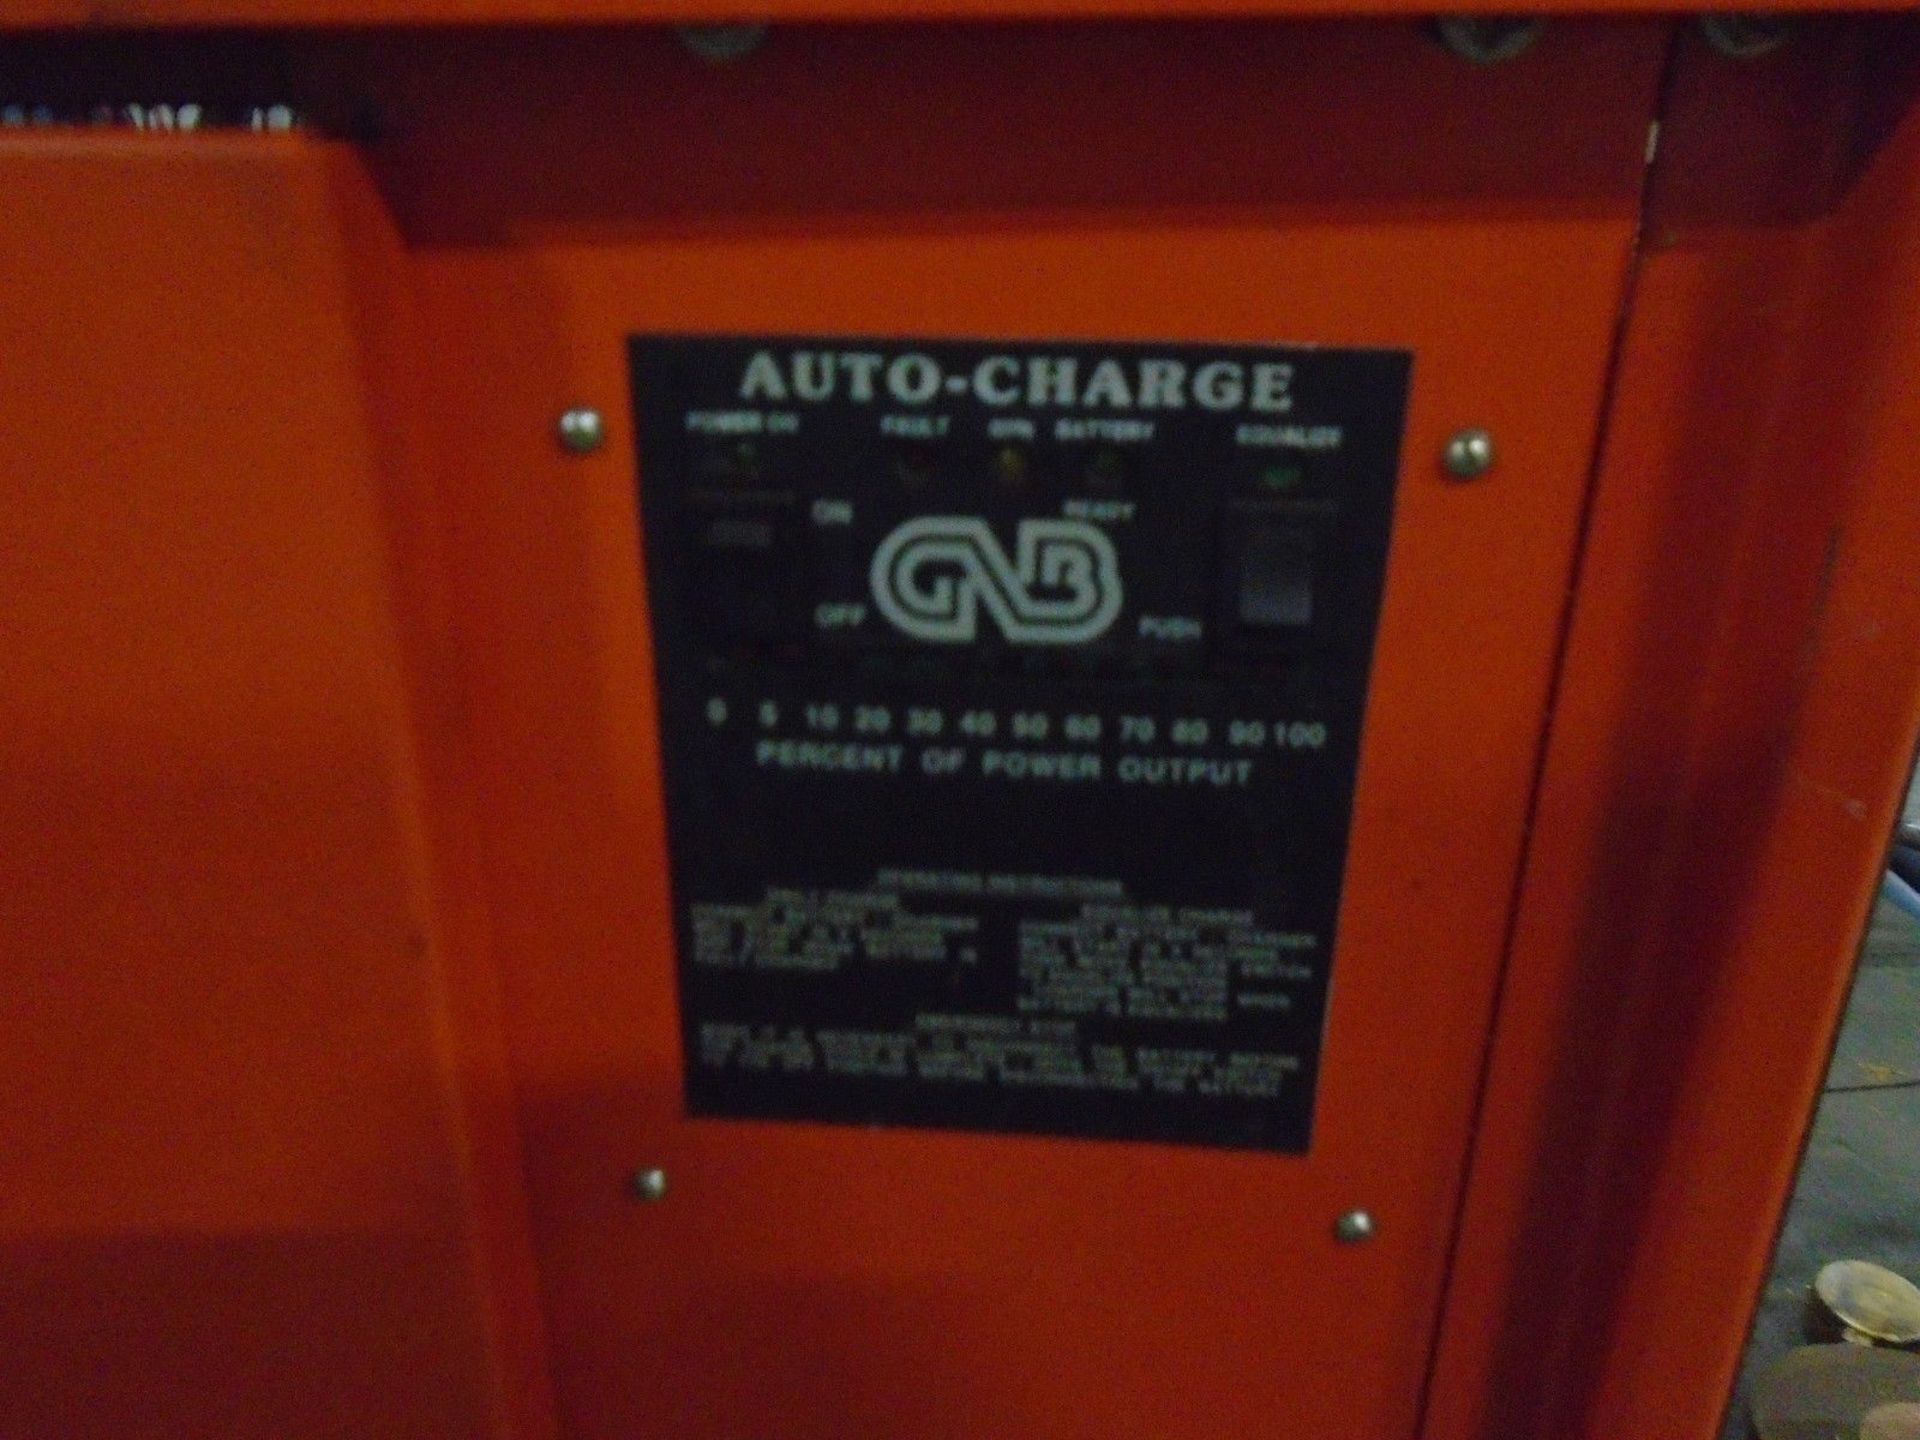 GB Ferro Charger Forklift Battery Charger 36 Volts Autocharge - Image 2 of 2